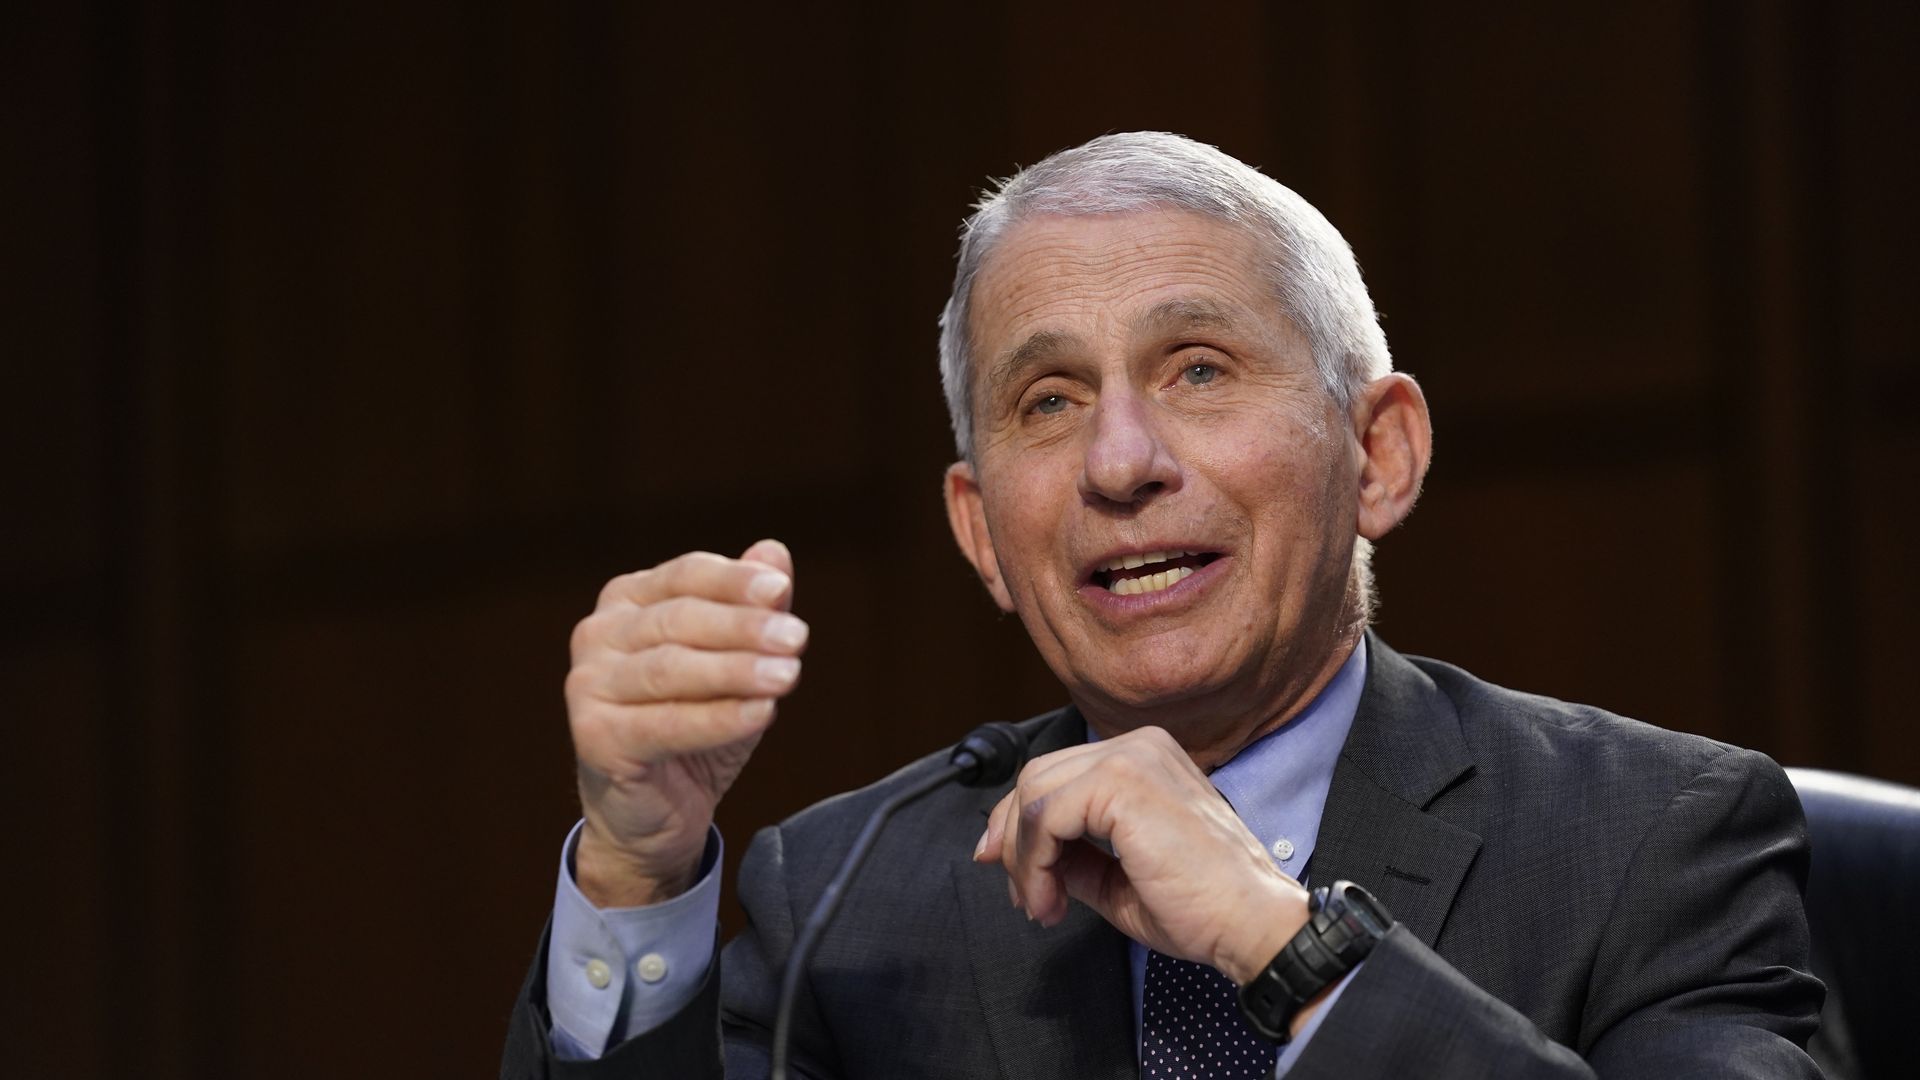 Anthony Fauci, NIAID director , speaks during a Senate  hearing in Washington, D.C., U.S., on Thursday, March 18, 2021.